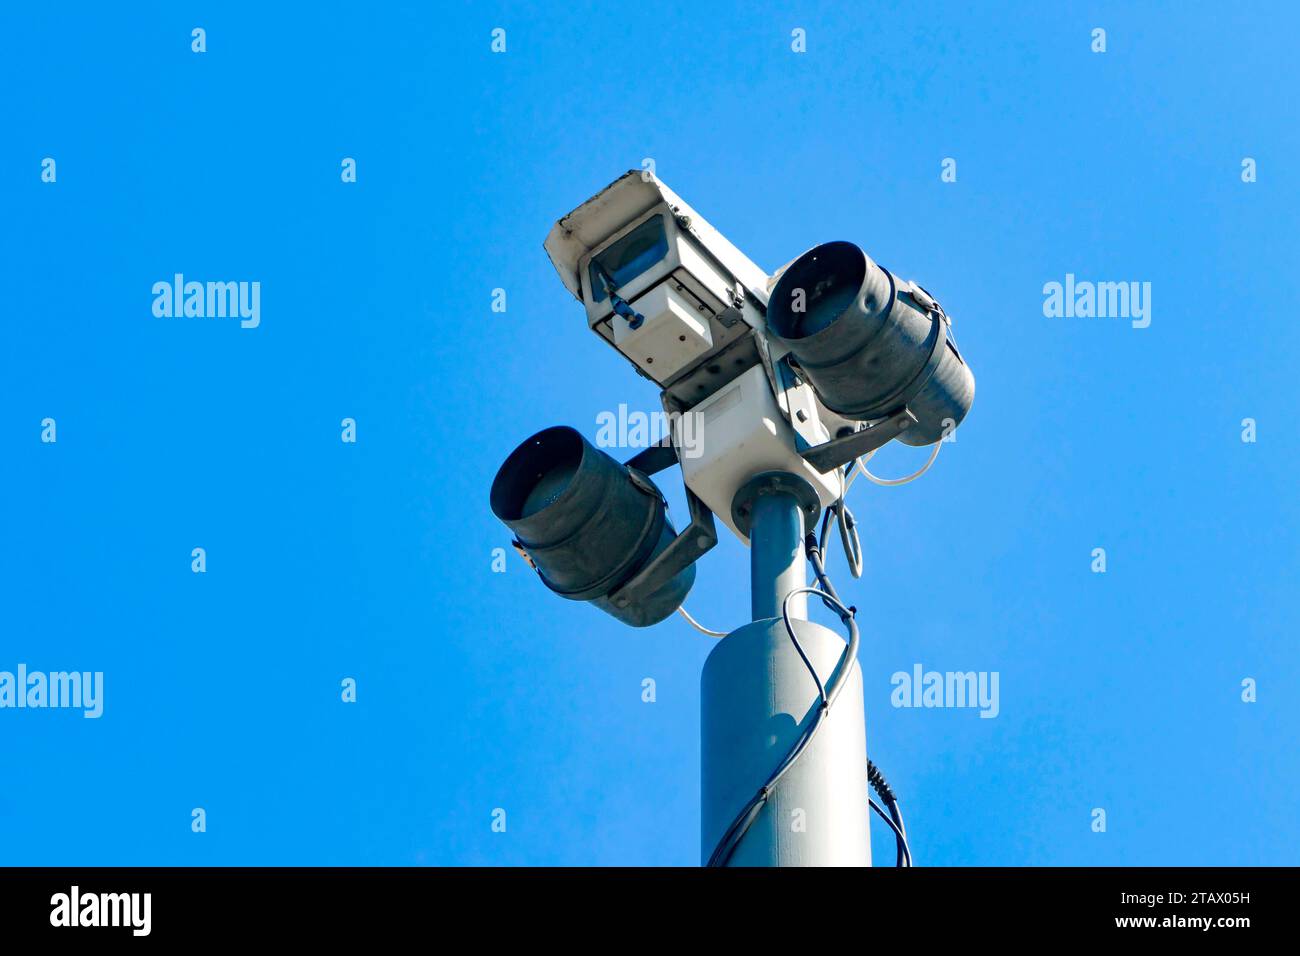 big brother is watching, CCTV camera against blue sky in Stoke on Trent Staffordshire UK Stock Photo